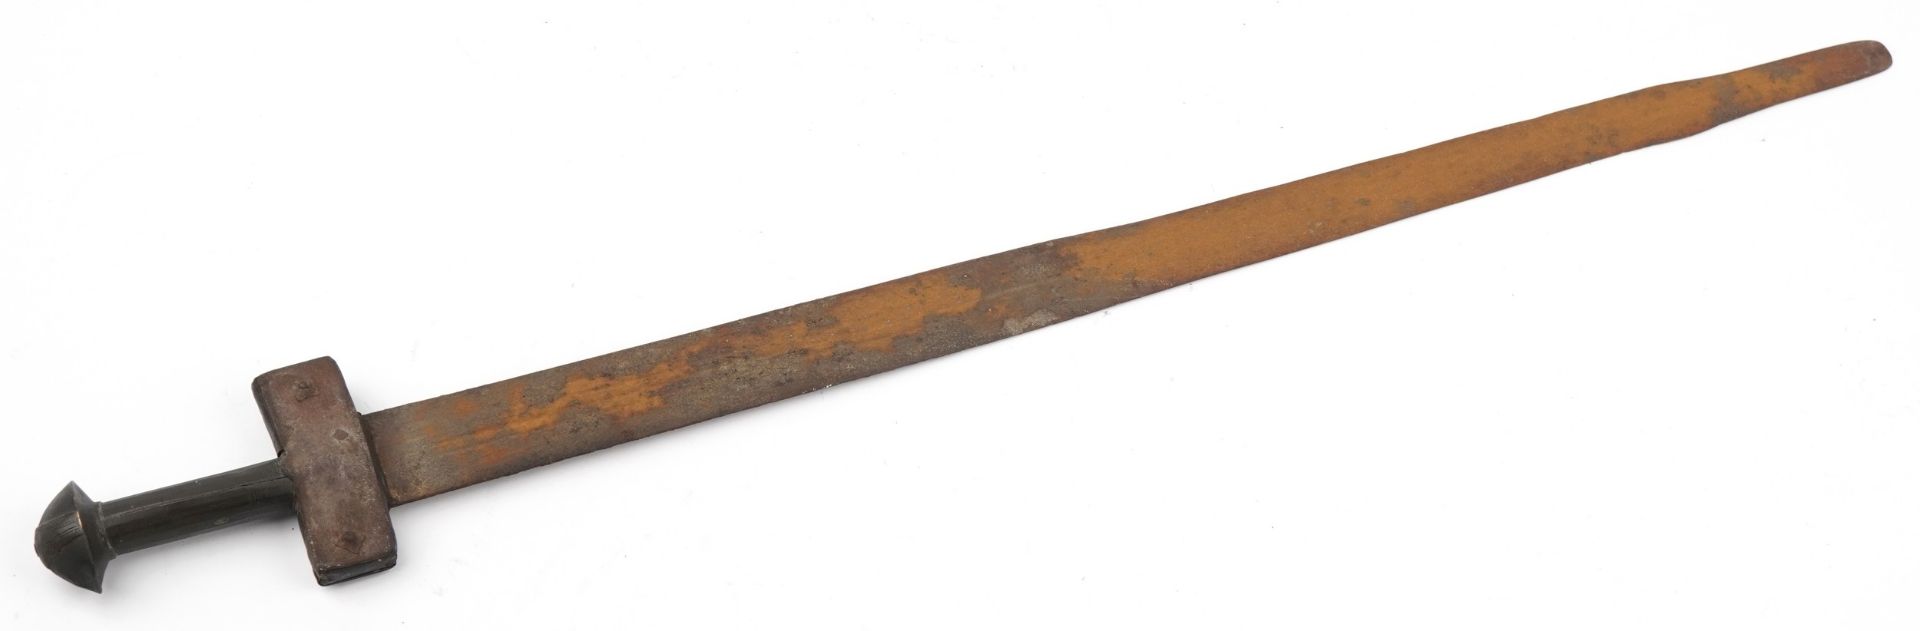 Antique sword with engraved pommel, possibly Moorish, 98.5cm in length - Image 3 of 3